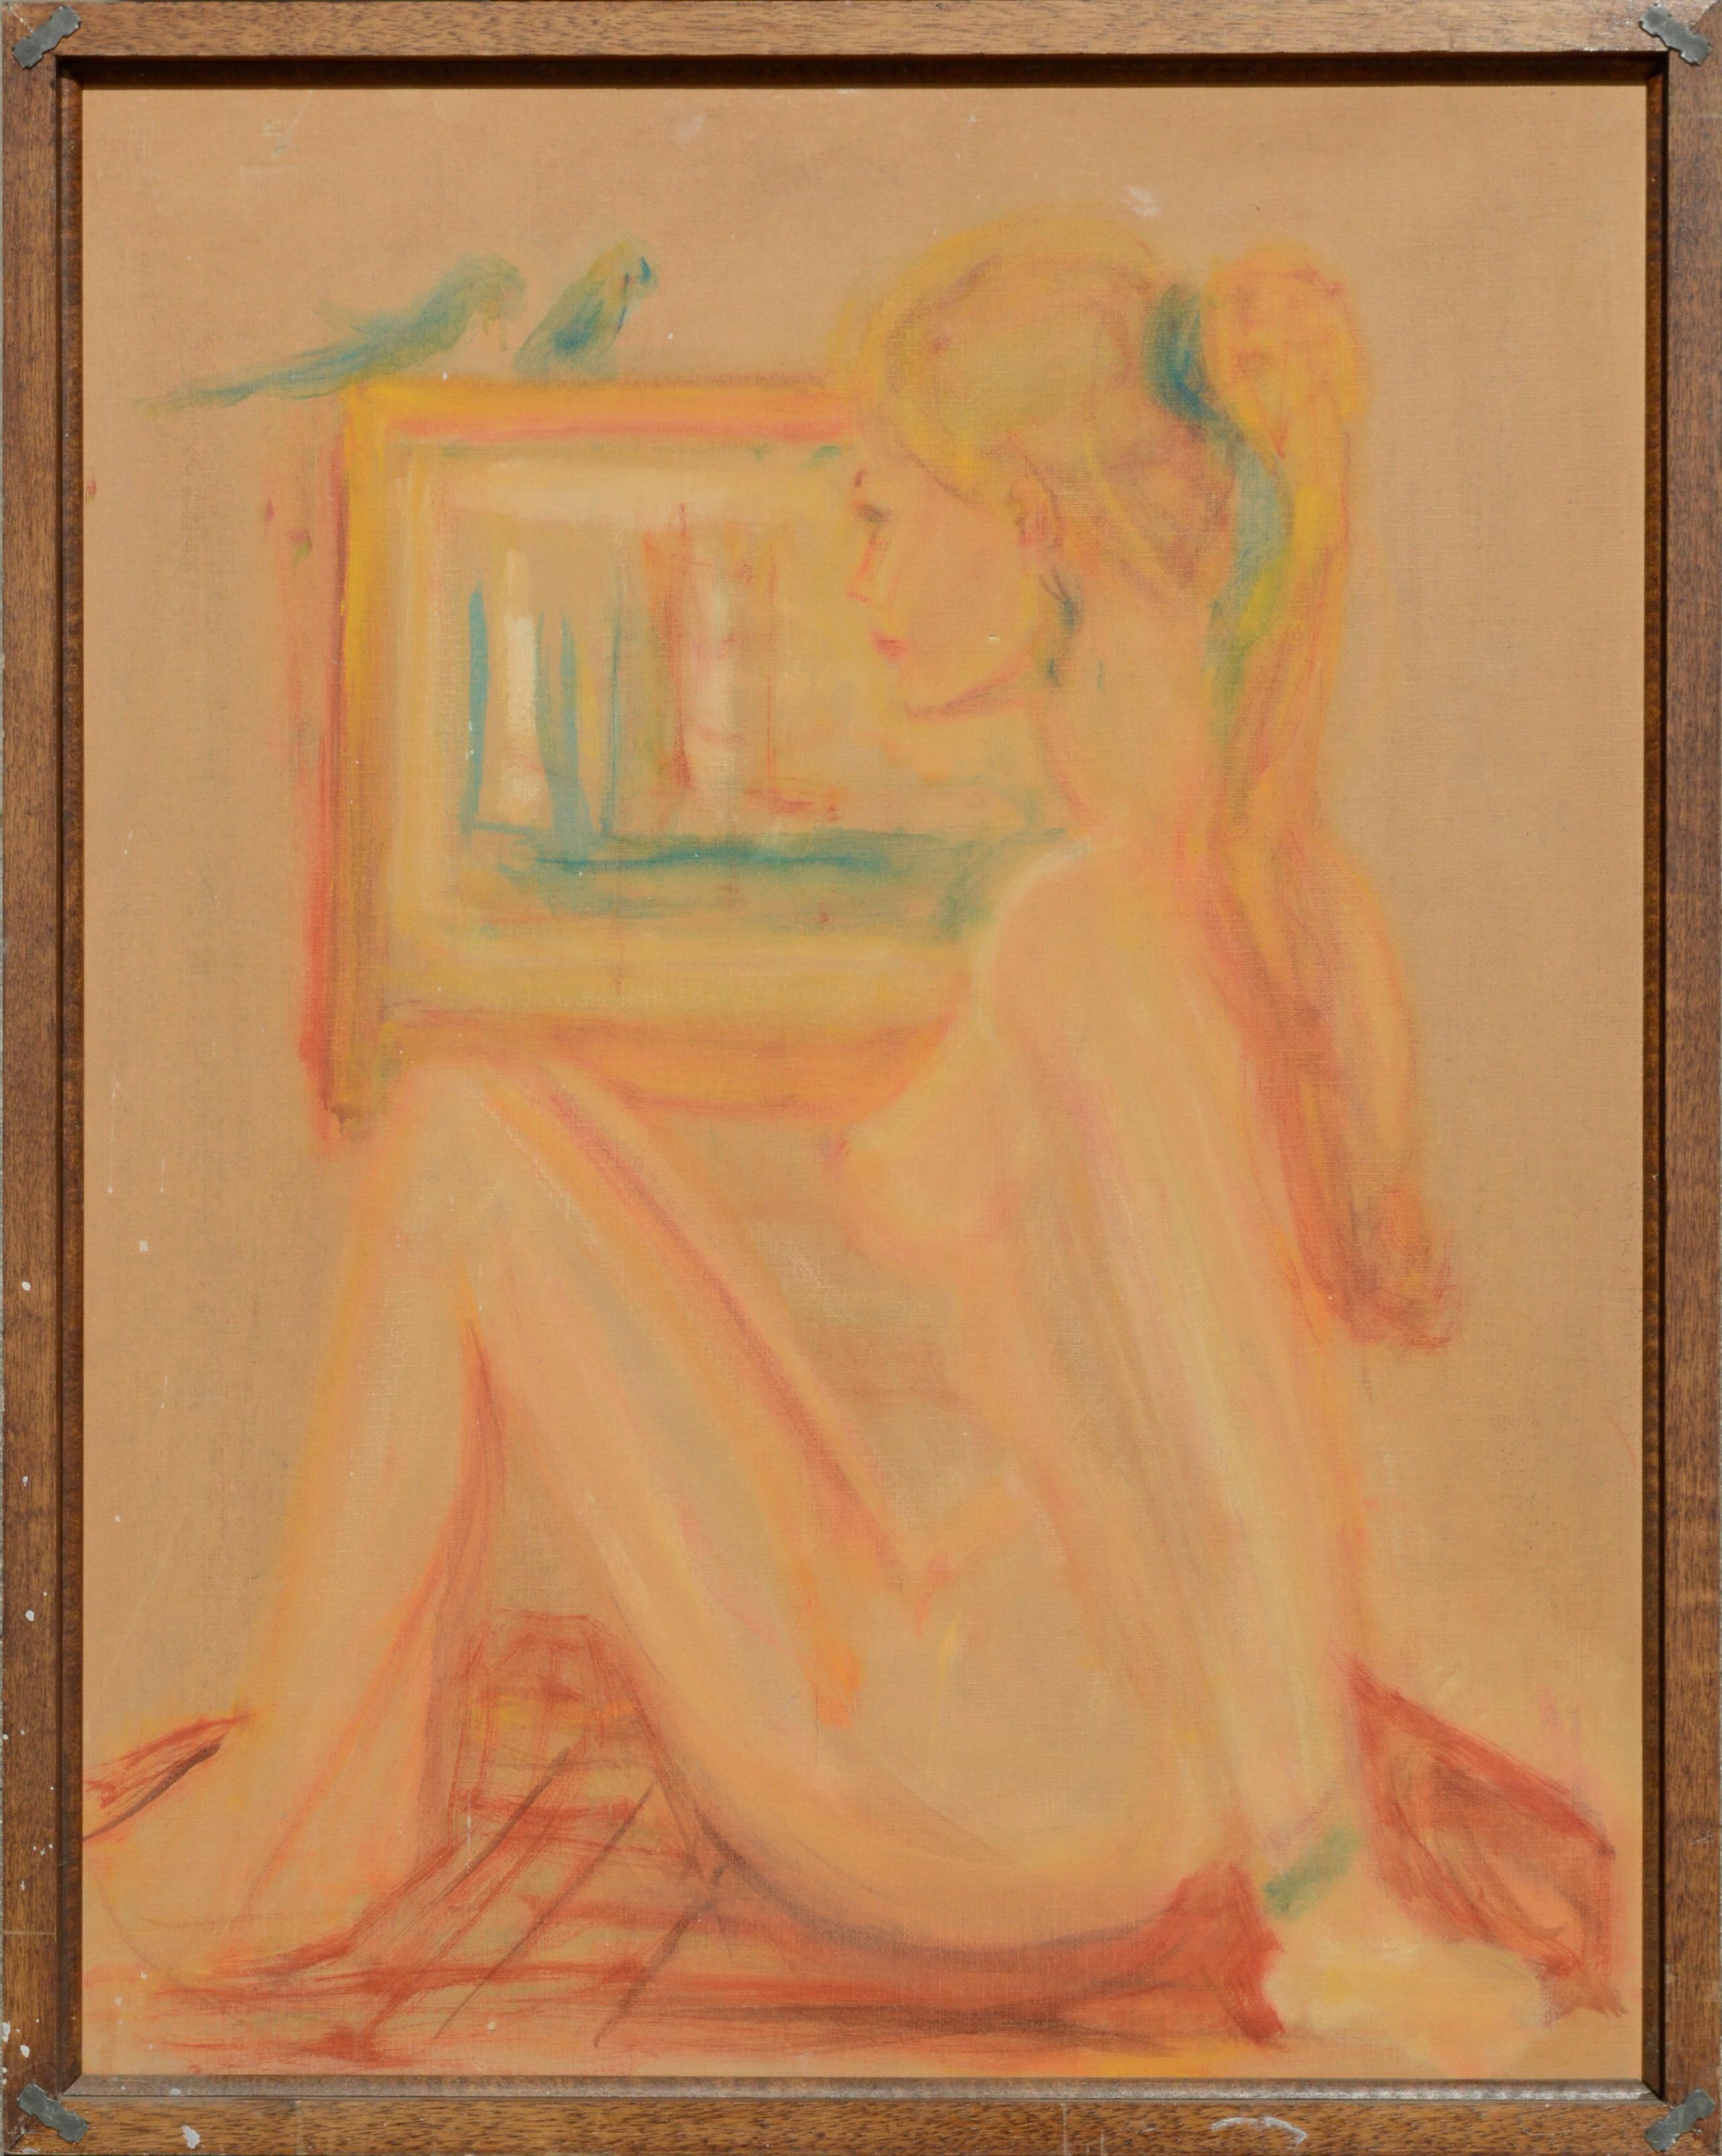 Portrait of a woman in a yellow dress at a gala event by an unknown California artist. There is a second, unfinished painting of a nude woman in front of a painting on verso. Acquired as part of Women with Gloves series. Presented in a simple wood